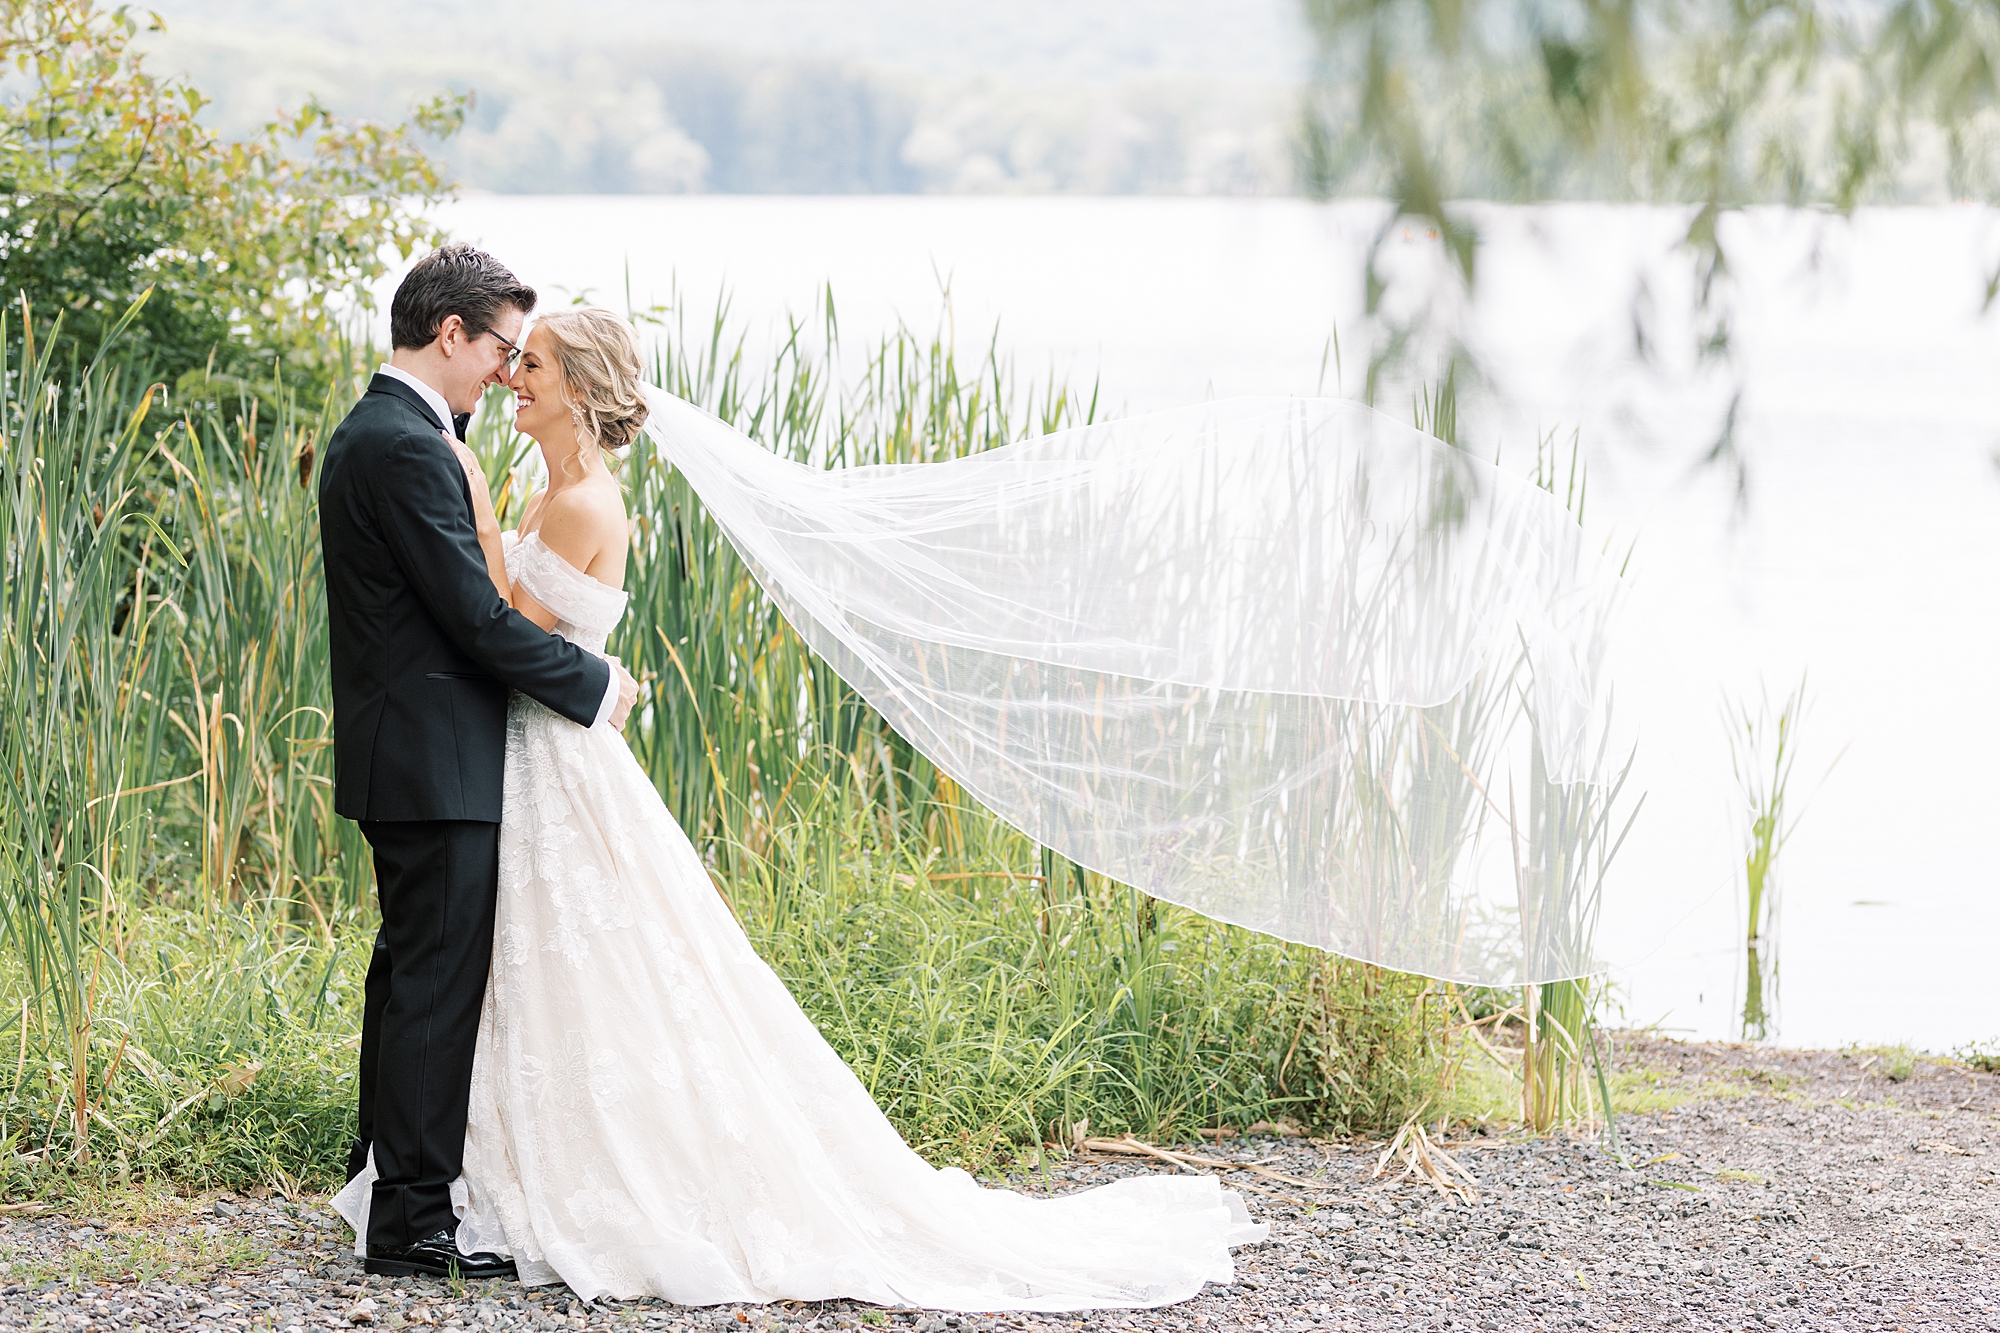 newlyweds lean together touching noses while bride's veil floats behind them 